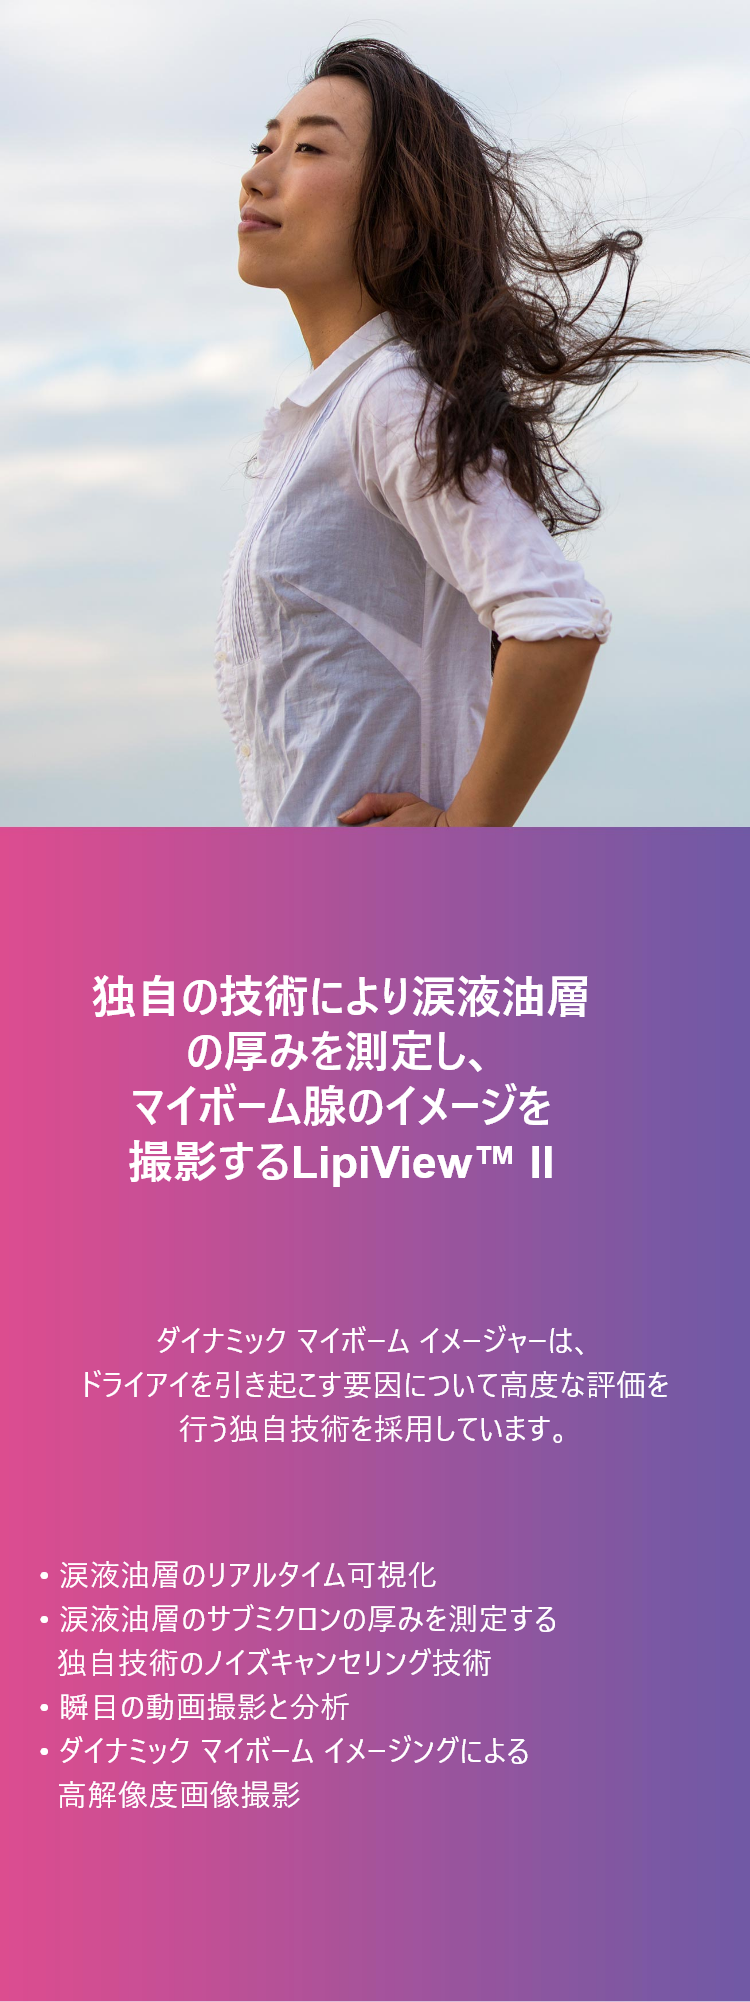 Lipiview II_mobile.png